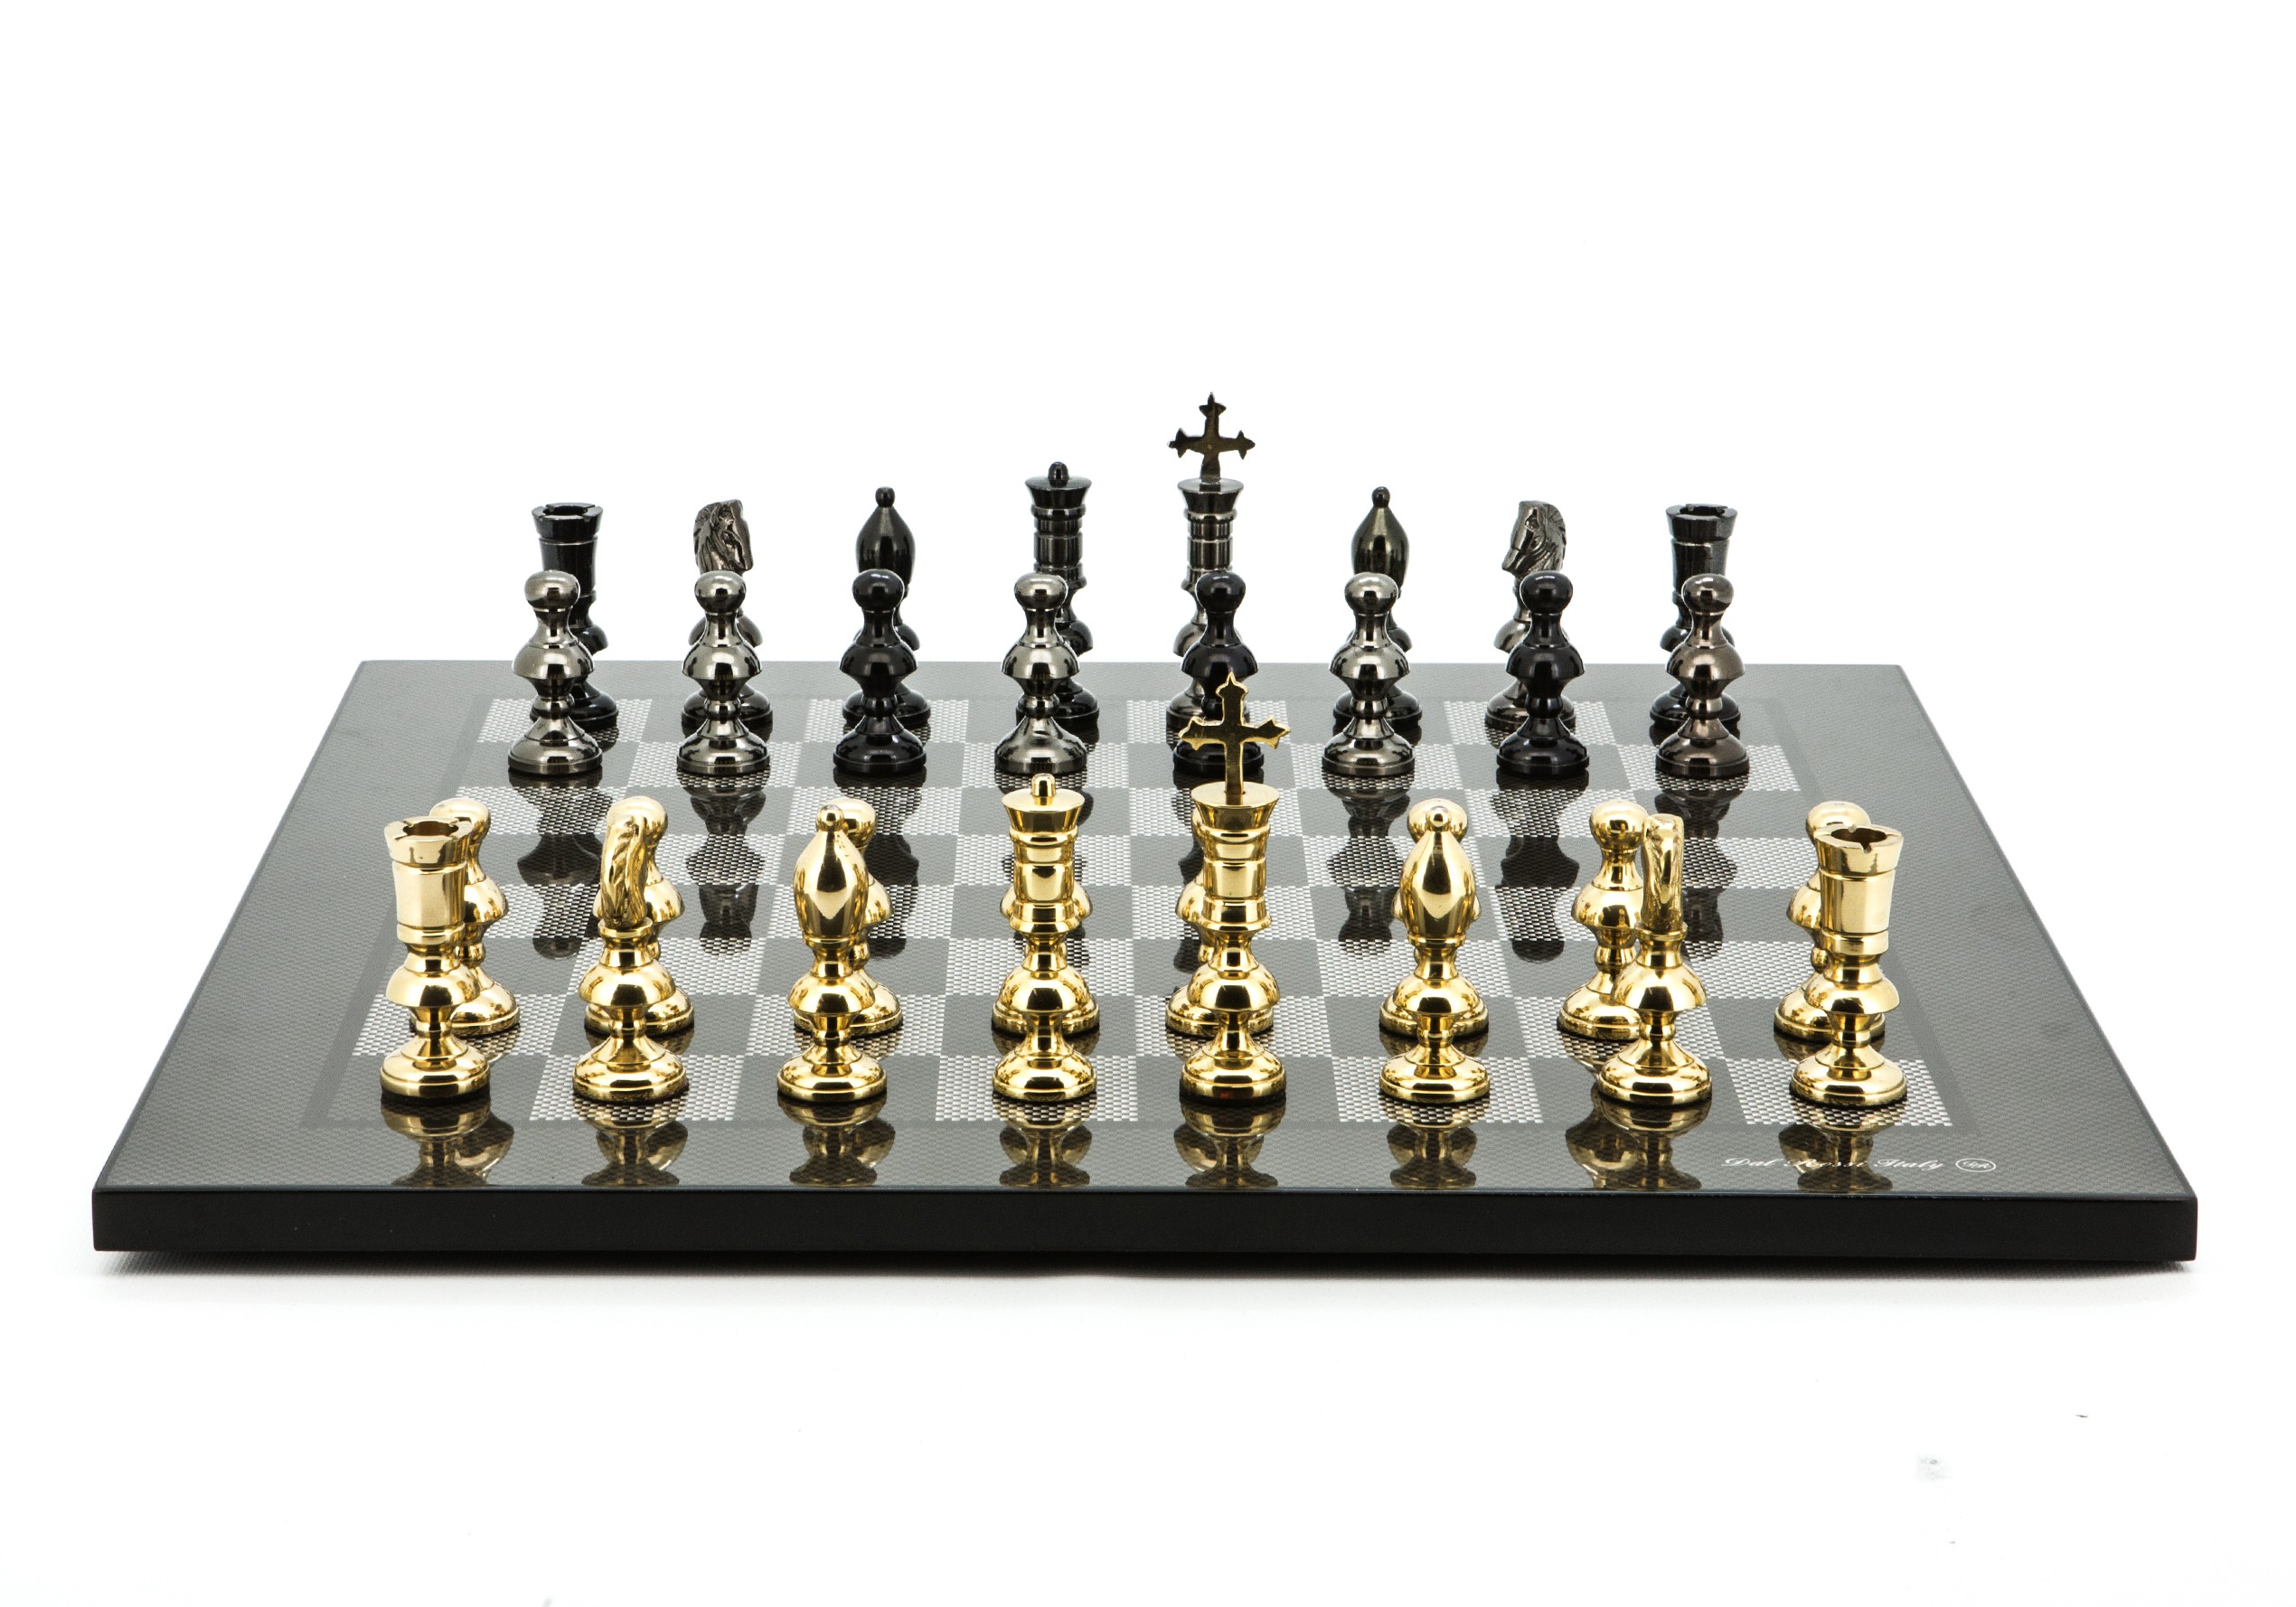 Dal Rossi Italy Chess Set Flat  Carbon Fibre Board 50cm, With Metal Dark Titanium and Gold Chessmen 110mm